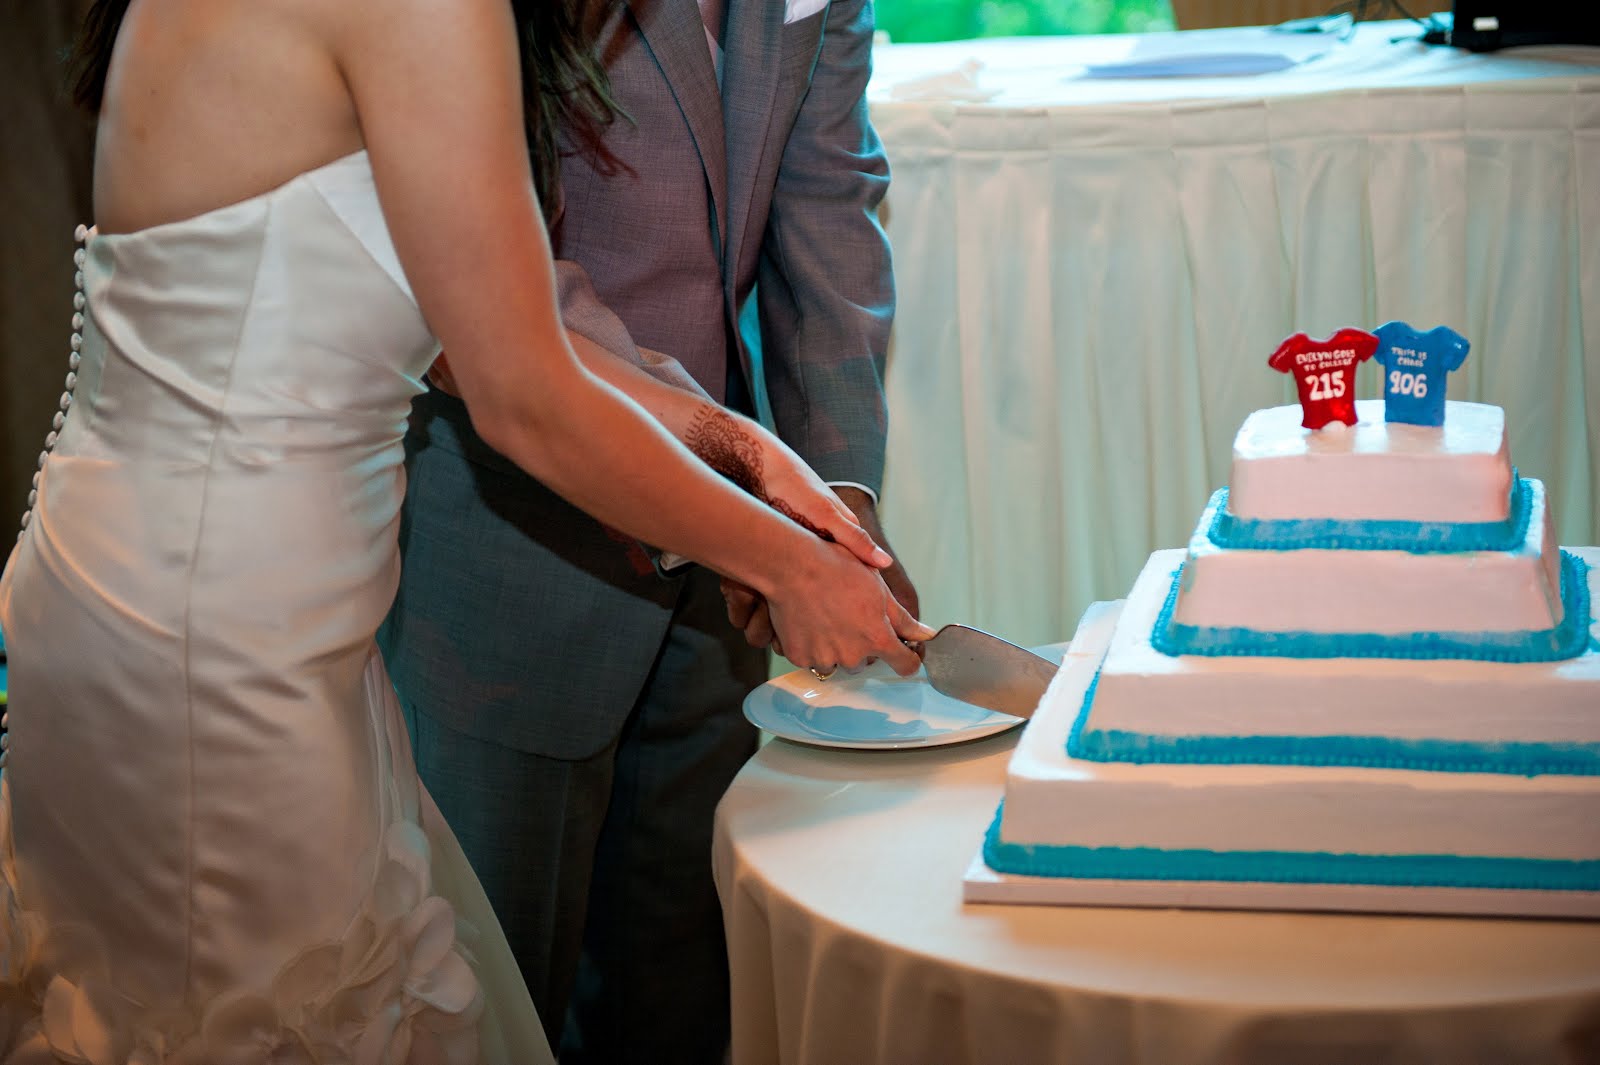 Two Wedding Belles Notes From a Newlywed The Cake {Carvel}